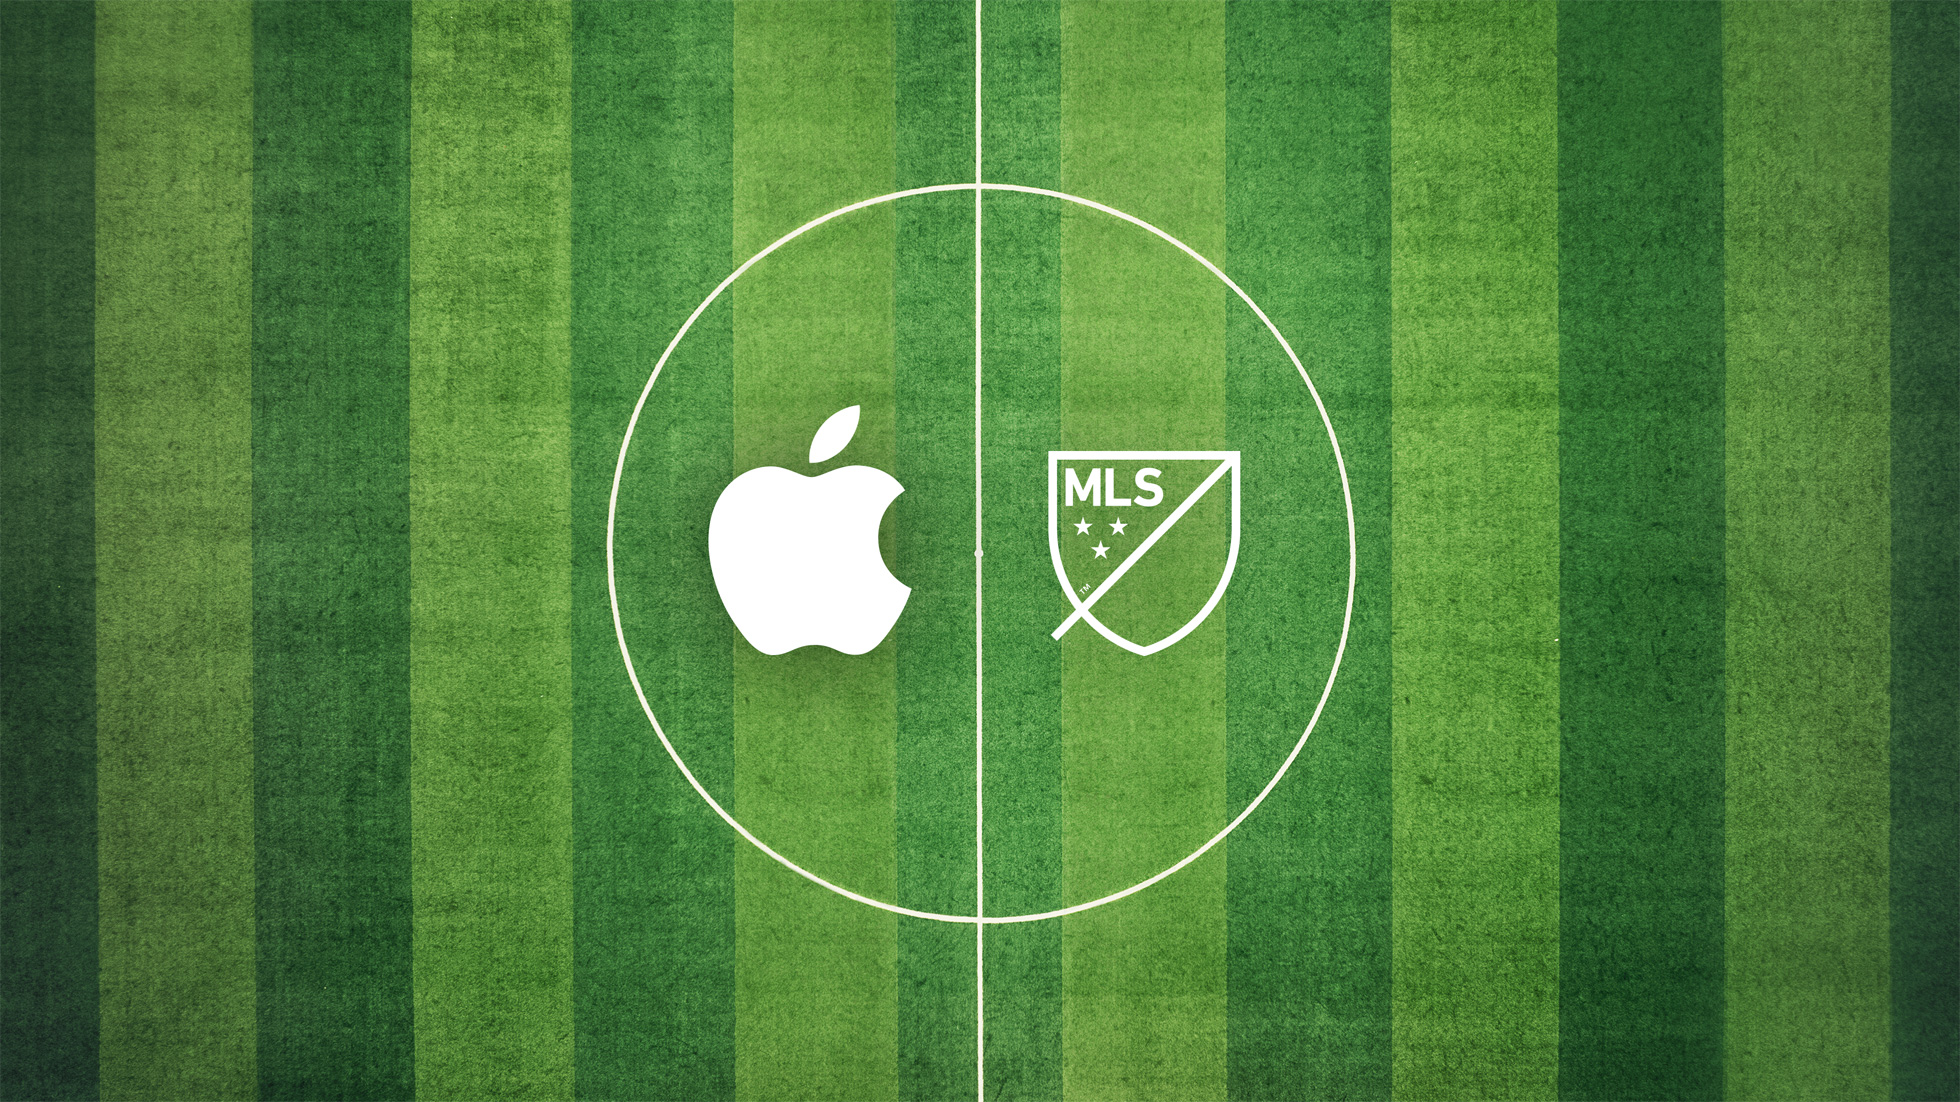 Bad news for cable: A major sports league will stream exclusively on Apple | Ars Technica